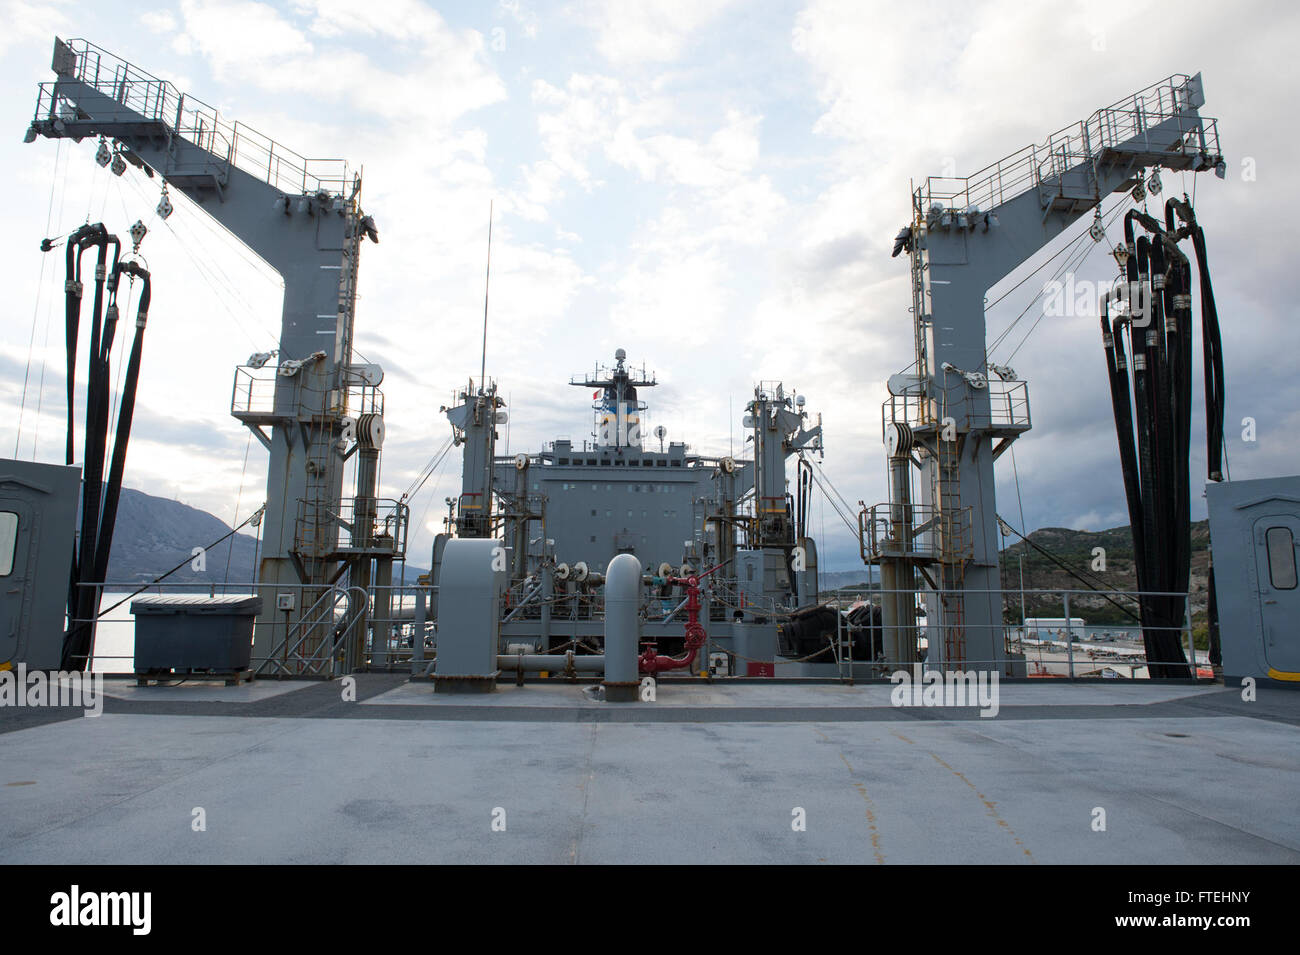 SOUDA BAY, Crete (Oct. 28, 2014) – The fleet replenishment oiler USNS Leroy Grumman (T-AO 195) operates near Souda Bay. Grumman, the Military Sealift Command Mediterranean Sea duty oiler, is forward-deployed to the U.S. 6th Fleet area of operations in support of national security interests in Europe and Africa. Stock Photo